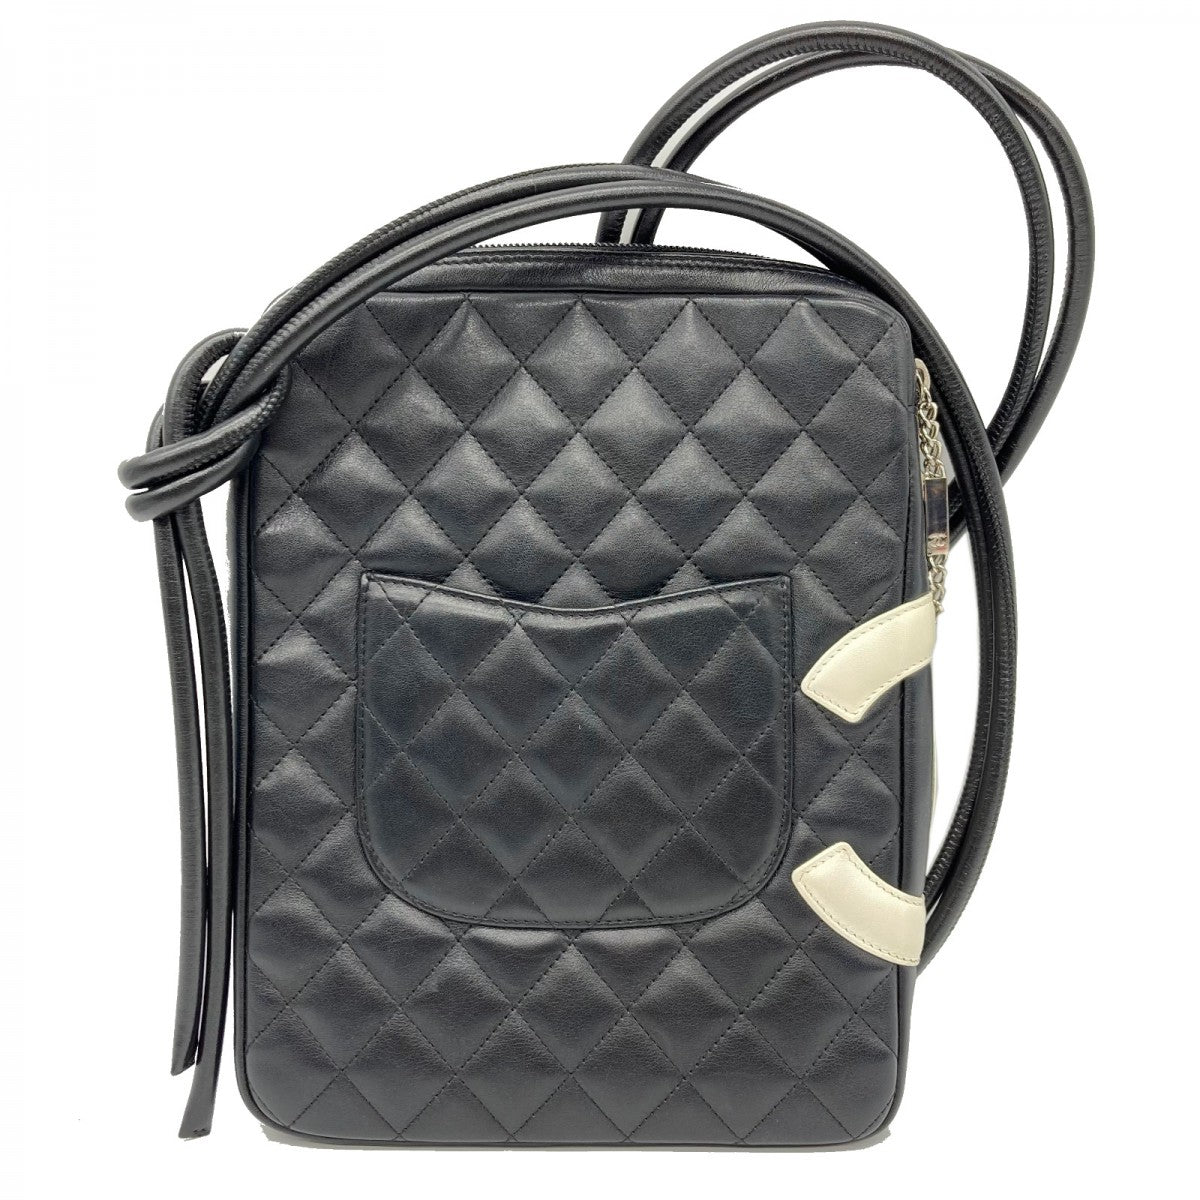 Cambon Quilted Leather Shoulder Bag